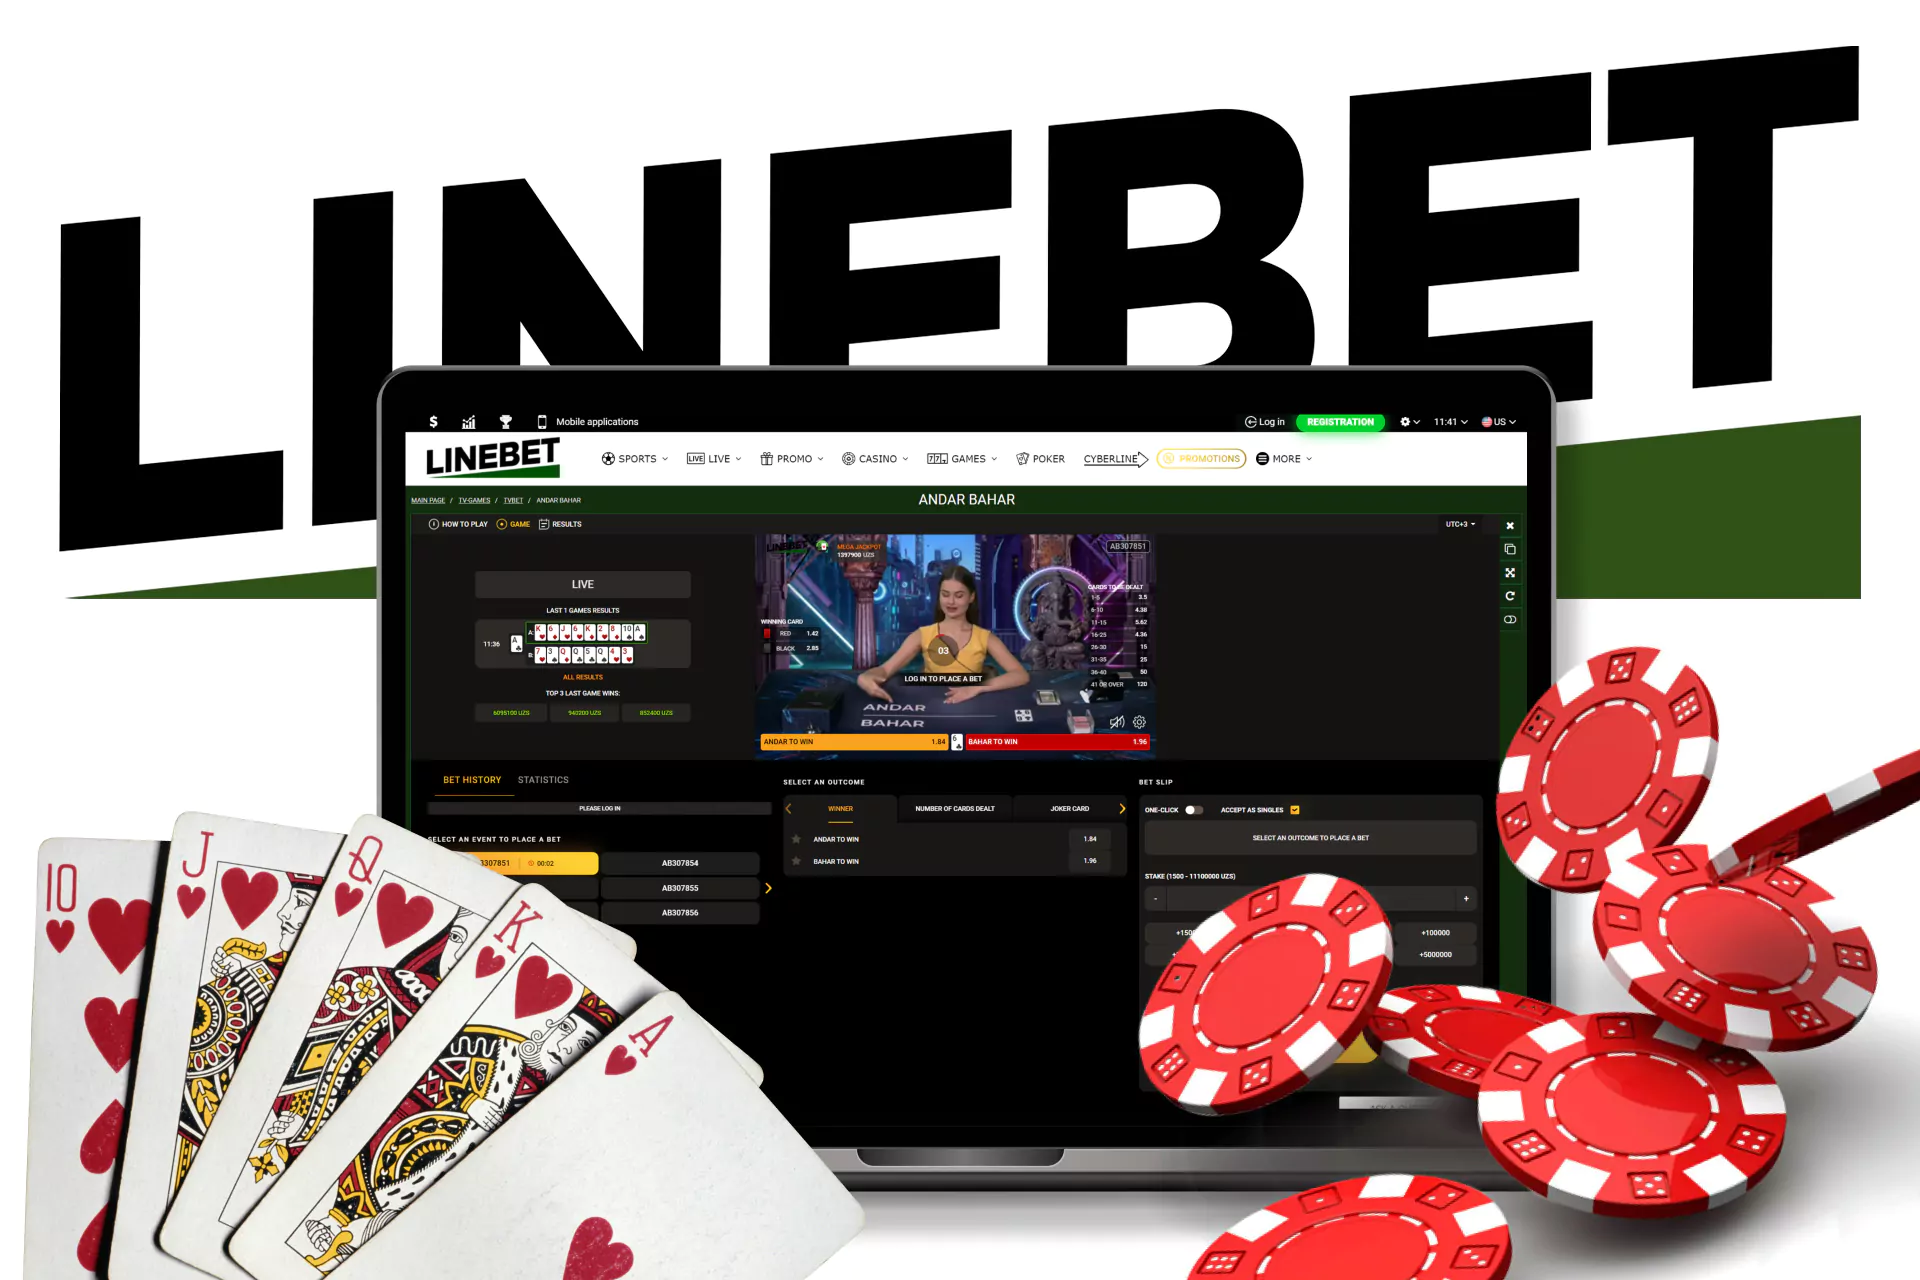 At the Linebet Casino, play an exciting Andar Bahar.